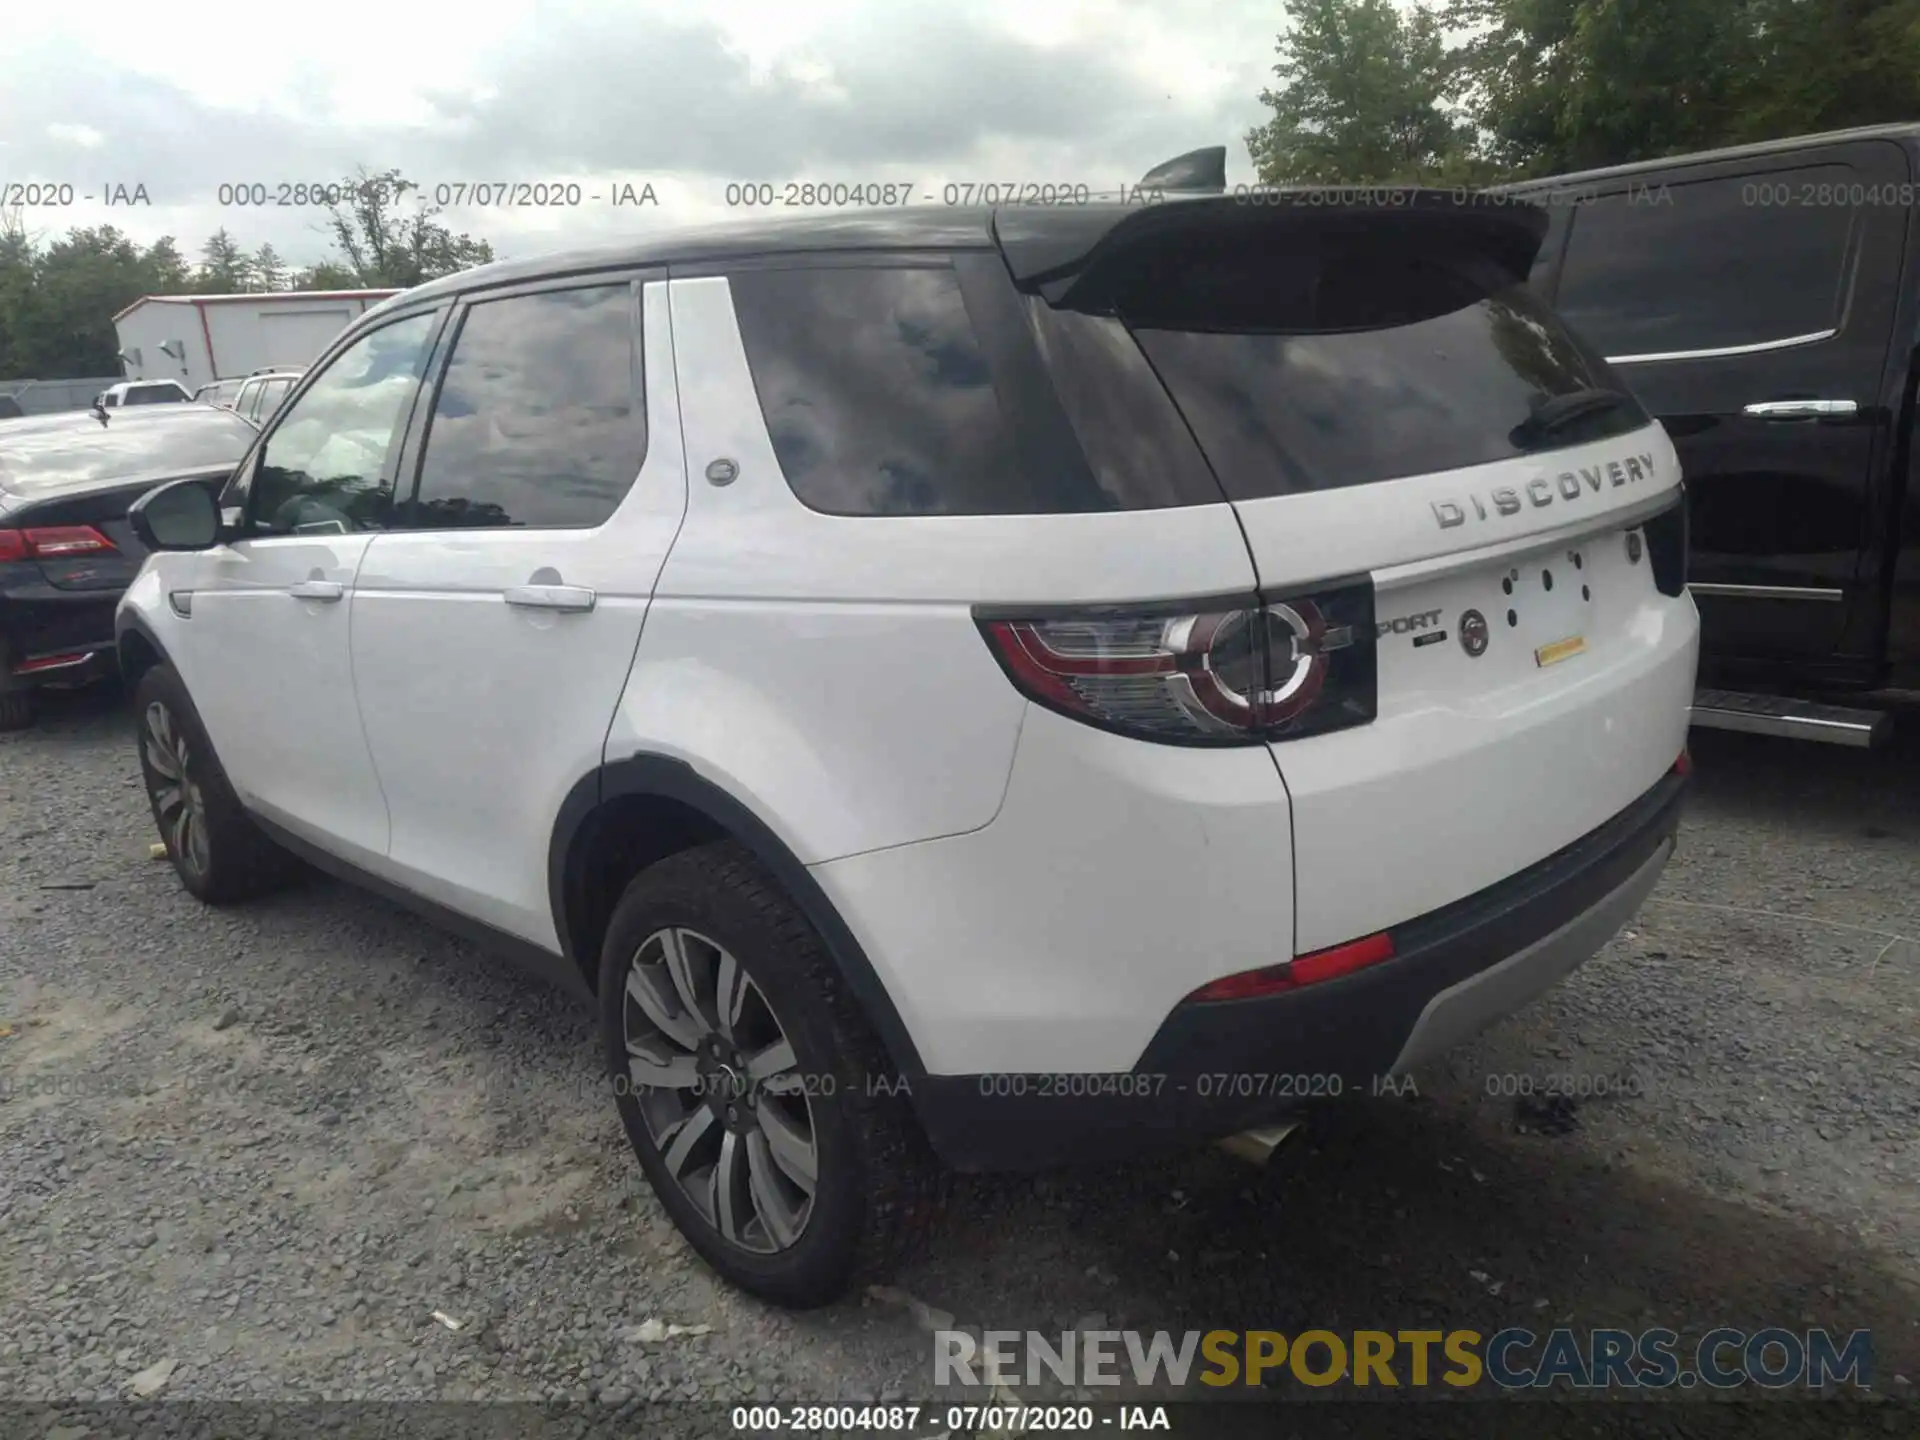 3 Photograph of a damaged car SALCT2FX3KH811339 LAND ROVER DISCOVERY SPORT 2019